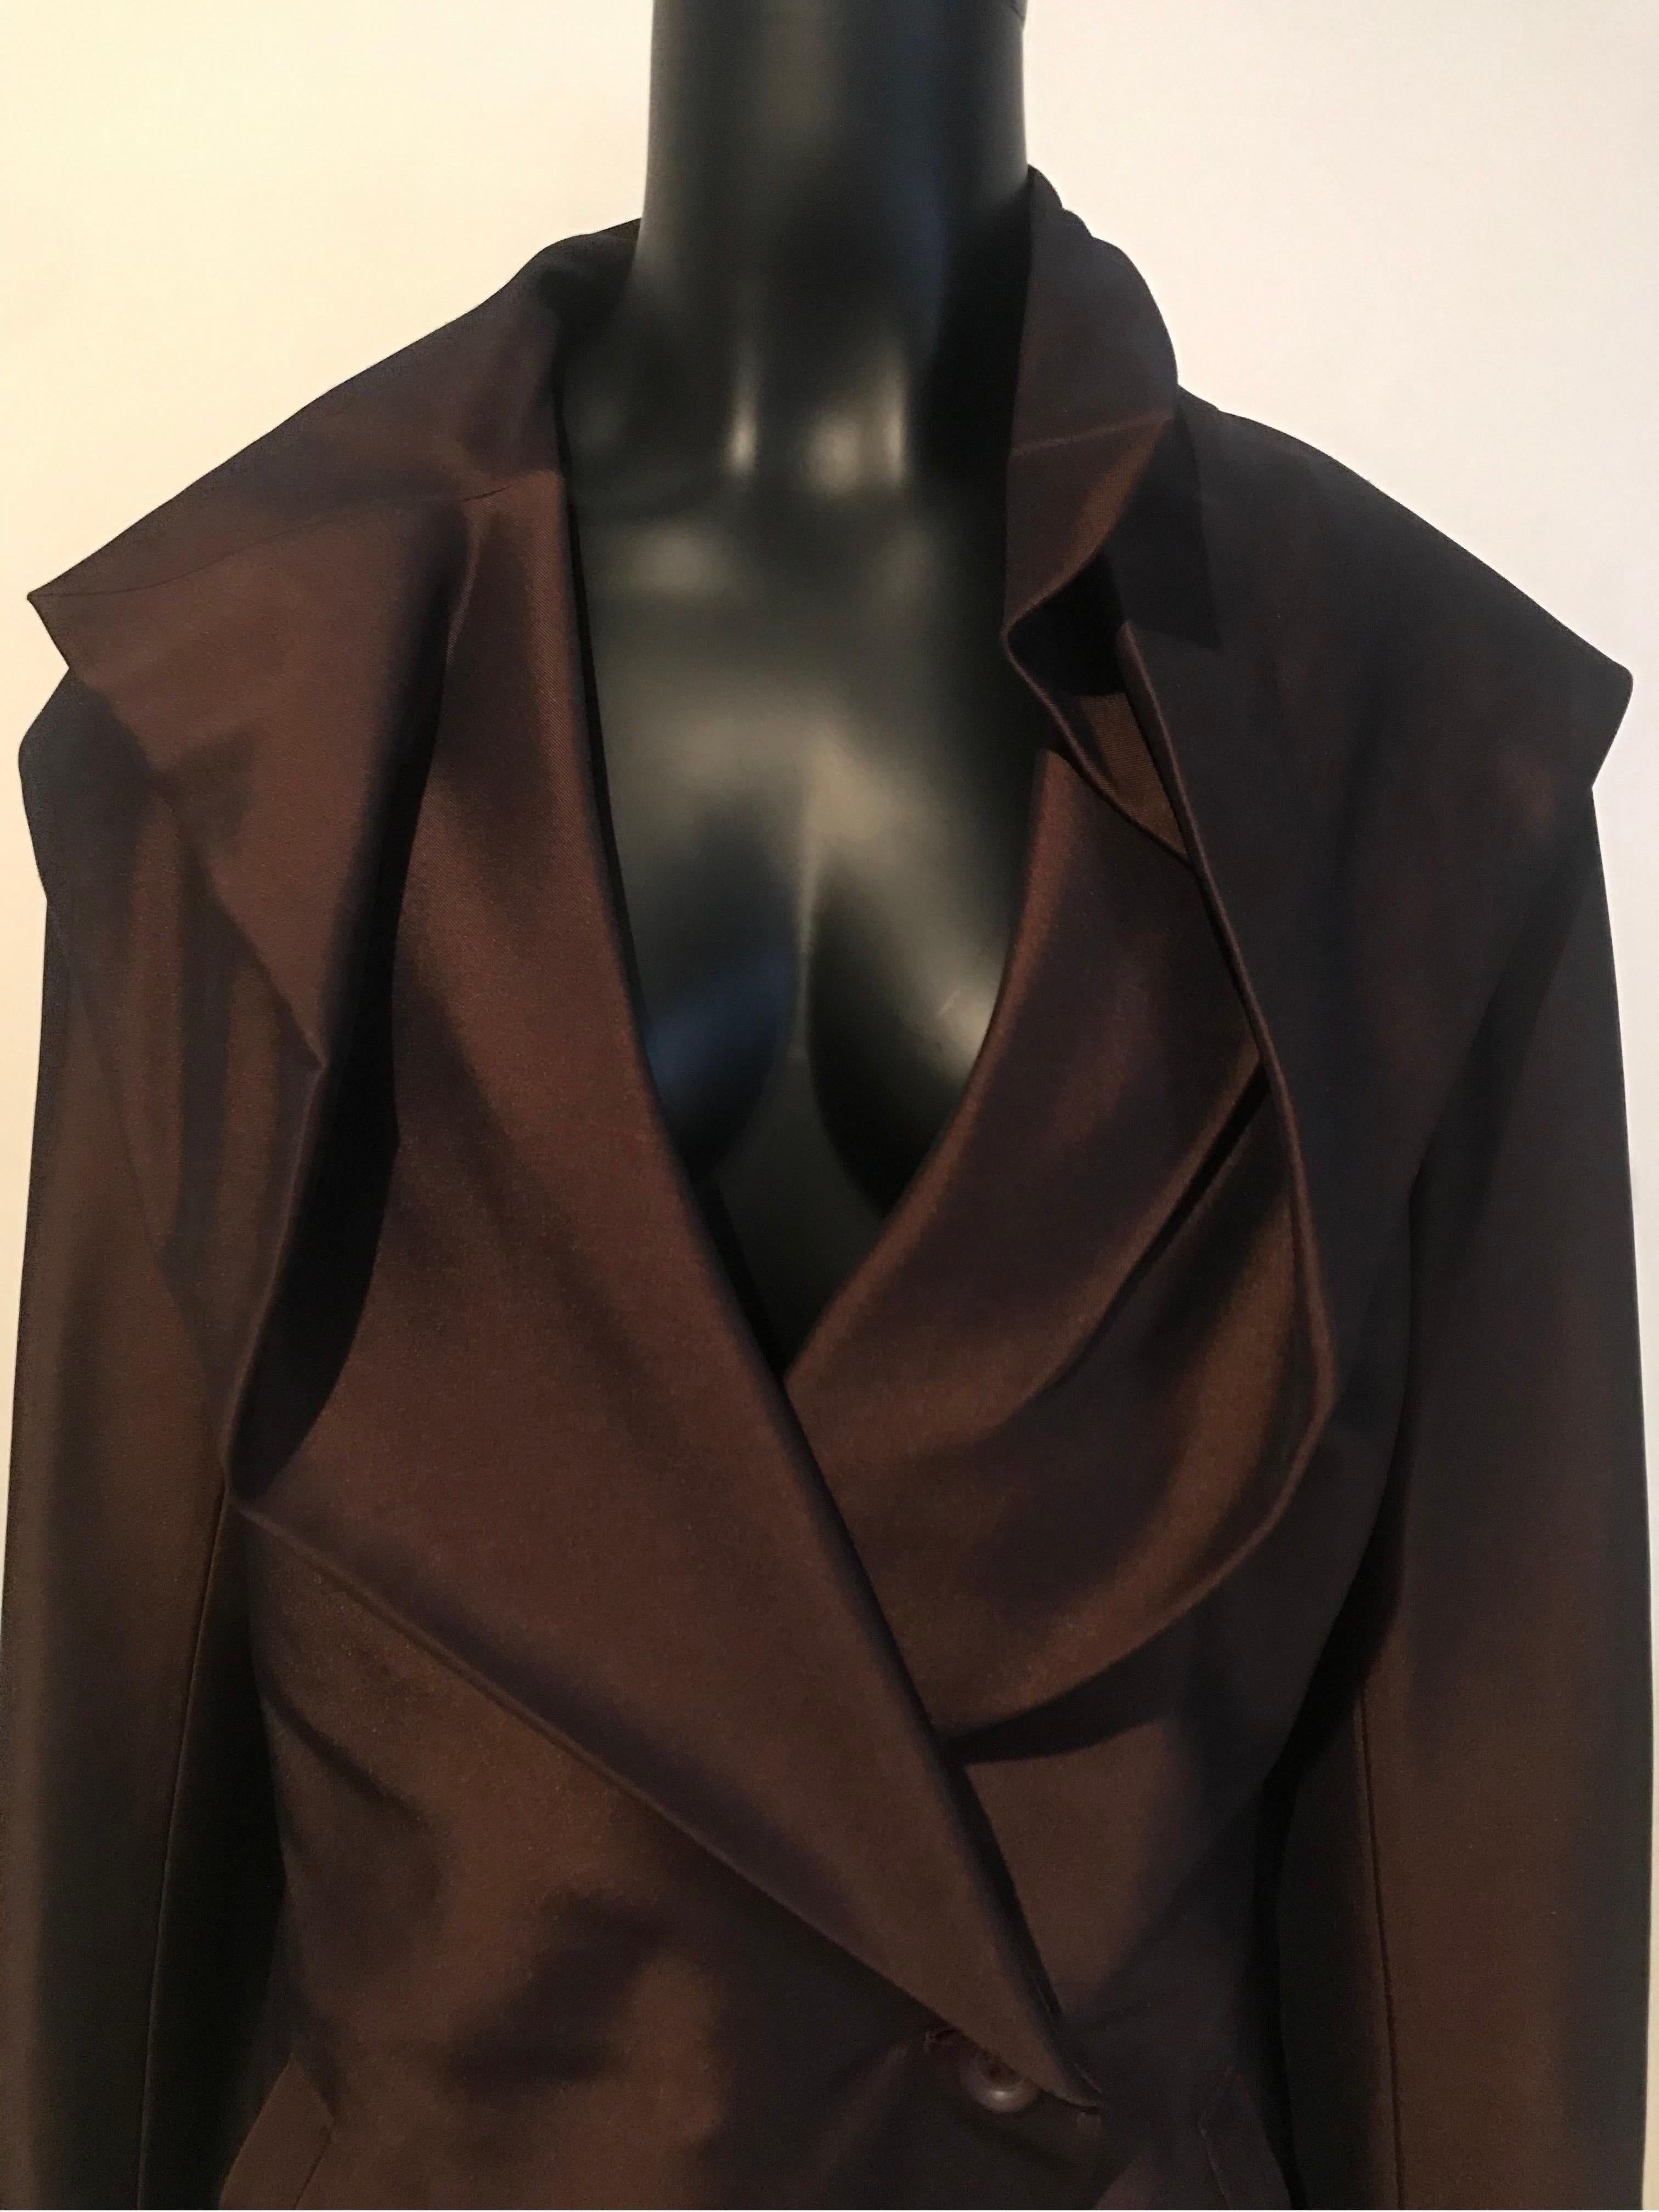 Architecturally cut and crafted archive Issey Miyake evening jacket from the late 1990’s in unique bronze/brown shimmering fabric. 

Made in Japan

Amazing cut to this unique piece for anyone’s wardrobe. 

Collectible 

Says size XL but would fit a